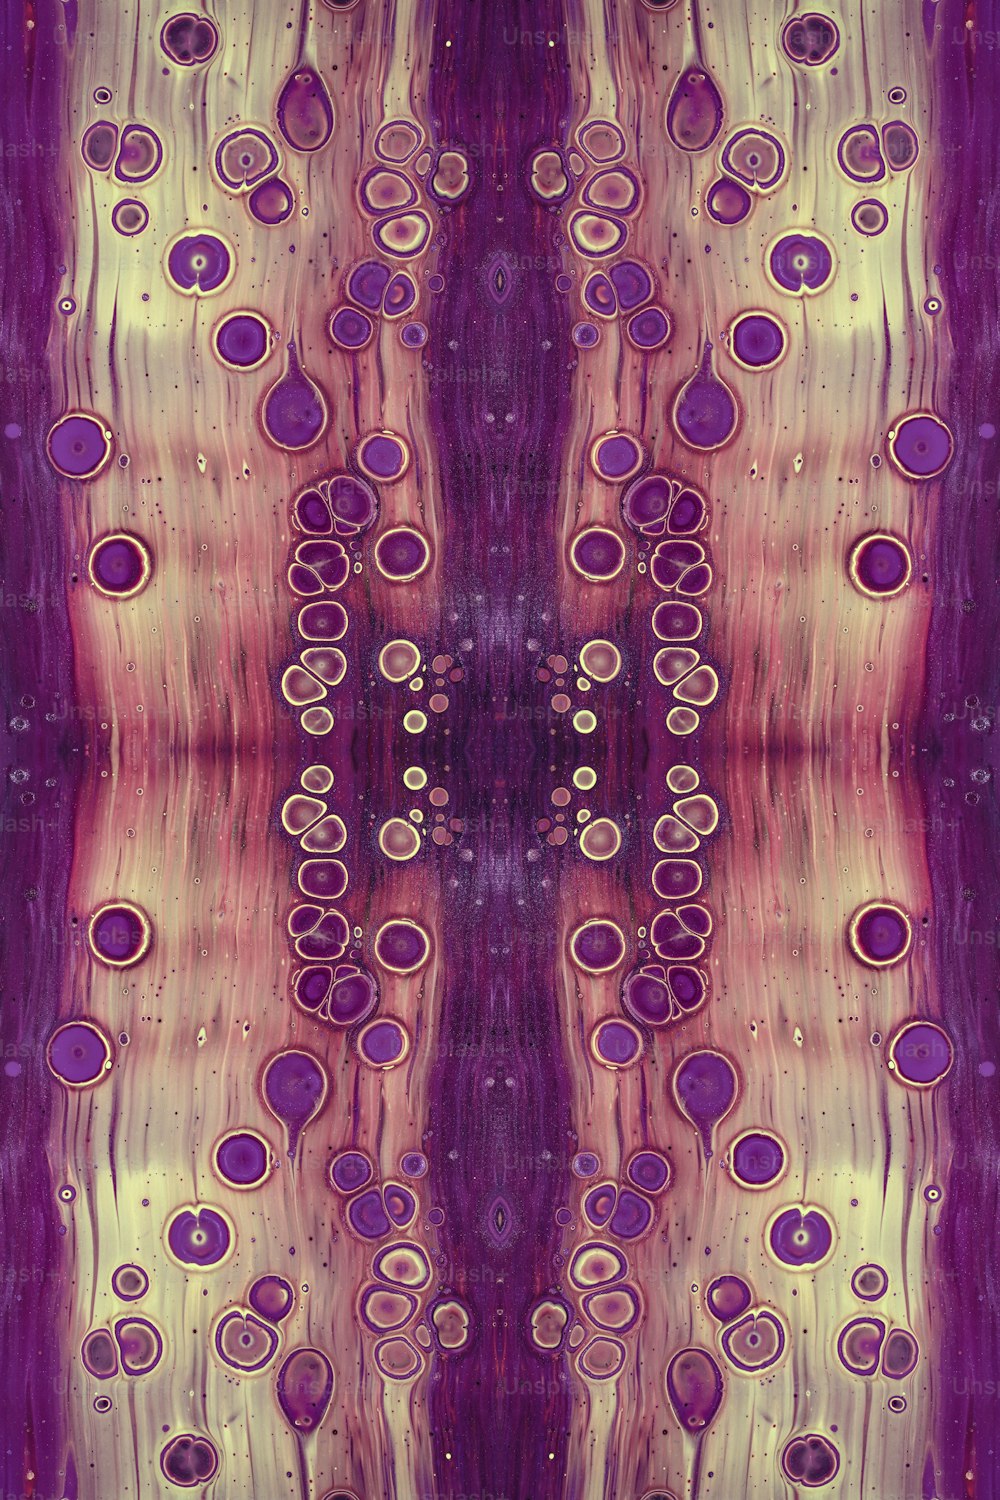 a purple and white abstract painting with circles